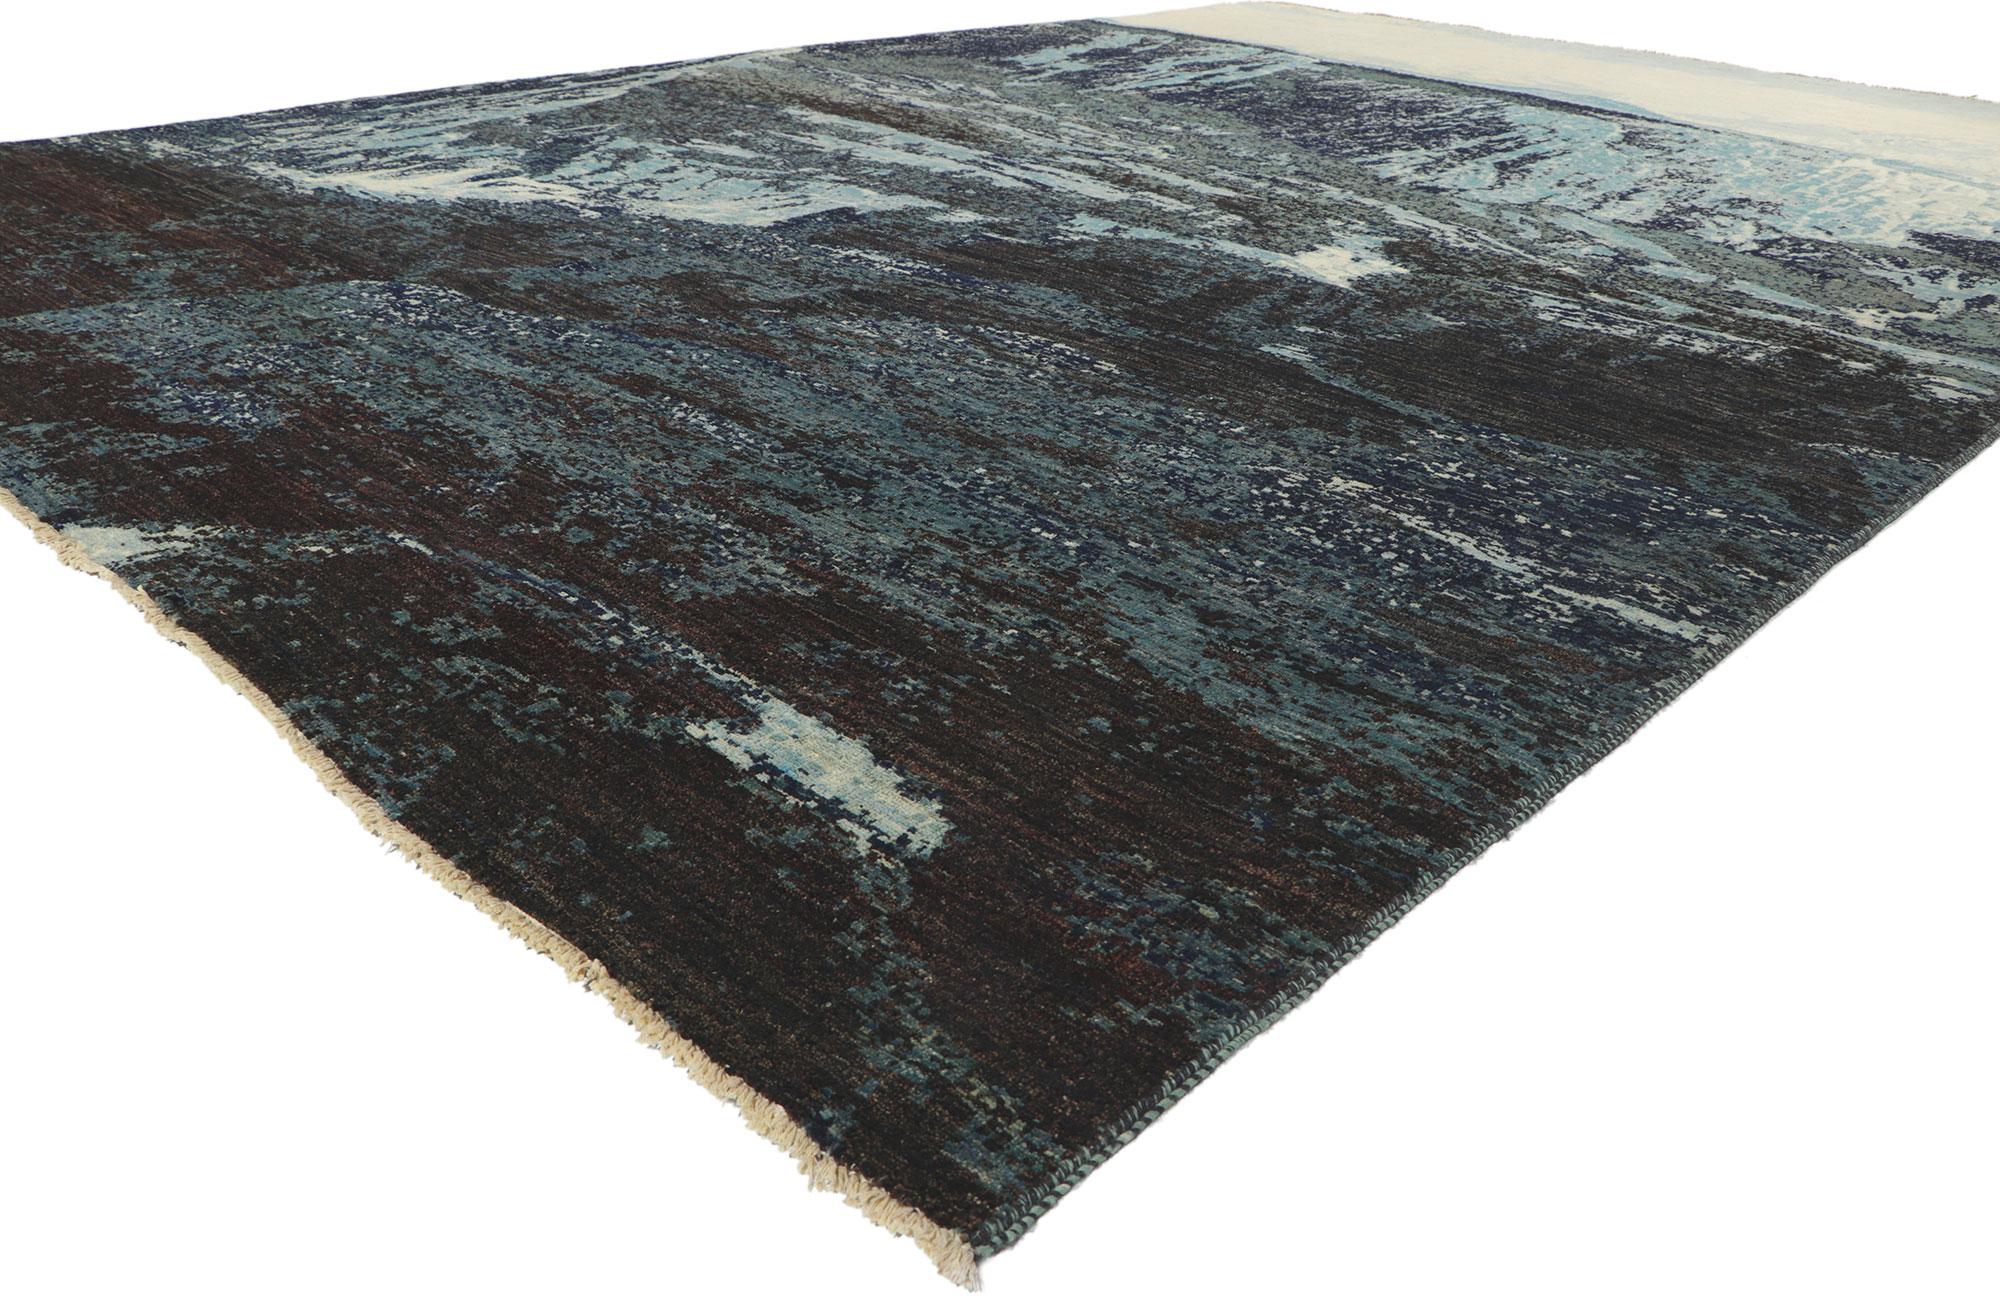 80752 New Contemporary Mountain Landscape Rug Inspired by Liu Haisu 09'11 x 14'02. Depicting scenery of Chinese mountain landscapes with a modern twist, this hand-knotted wool contemporary pictorial rug is a captivating vision of woven beauty. The